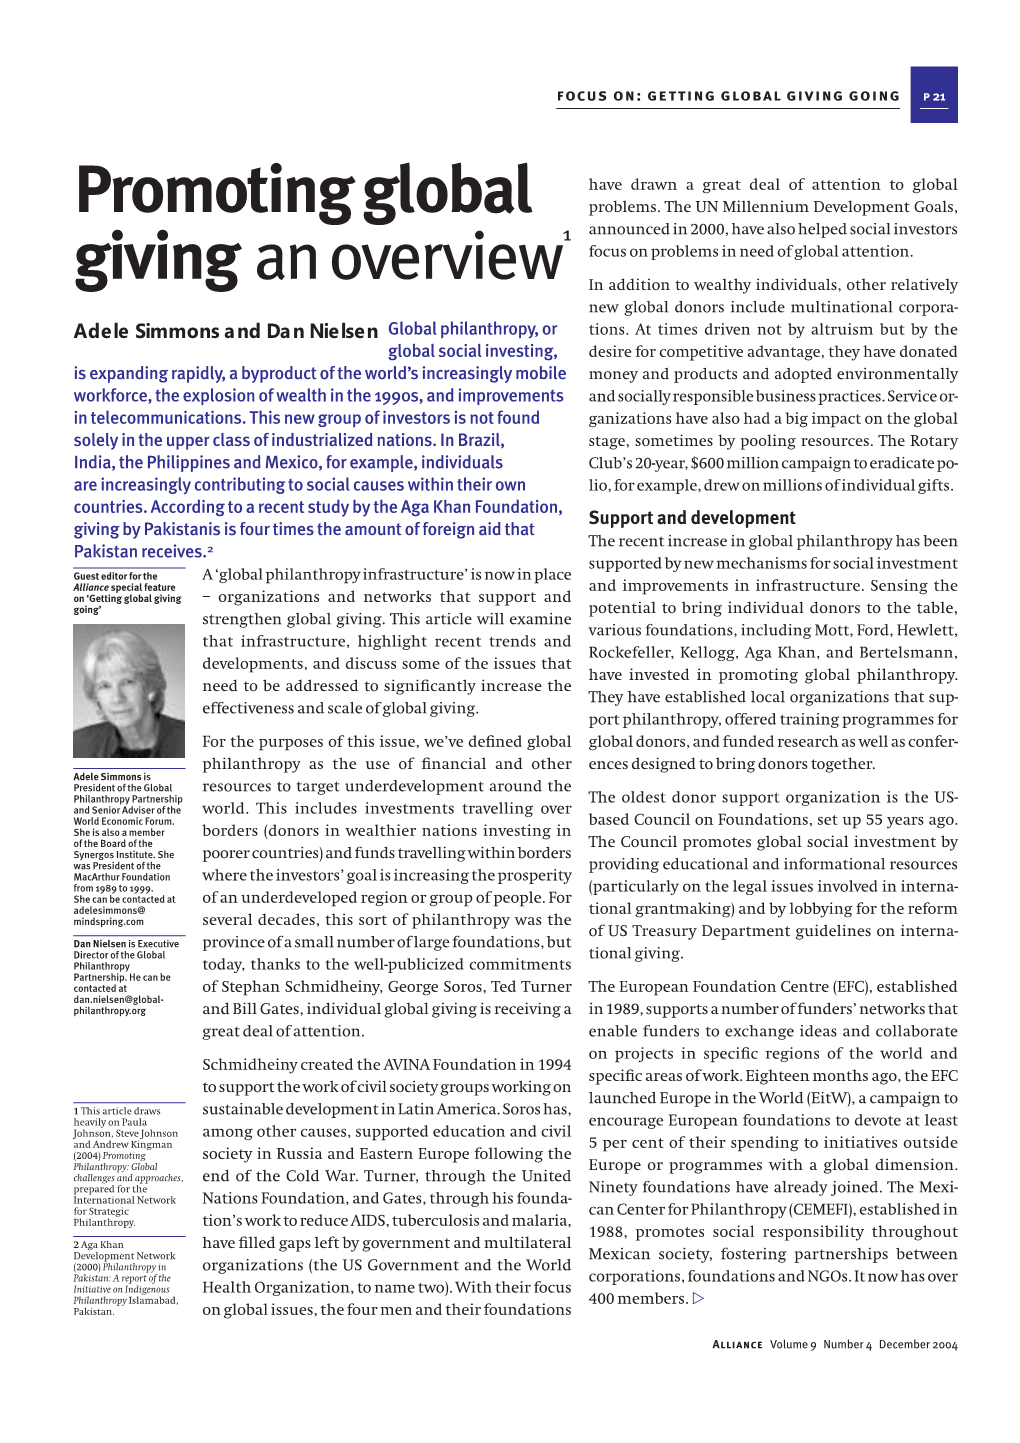 Promoting Global Giving – an Overview